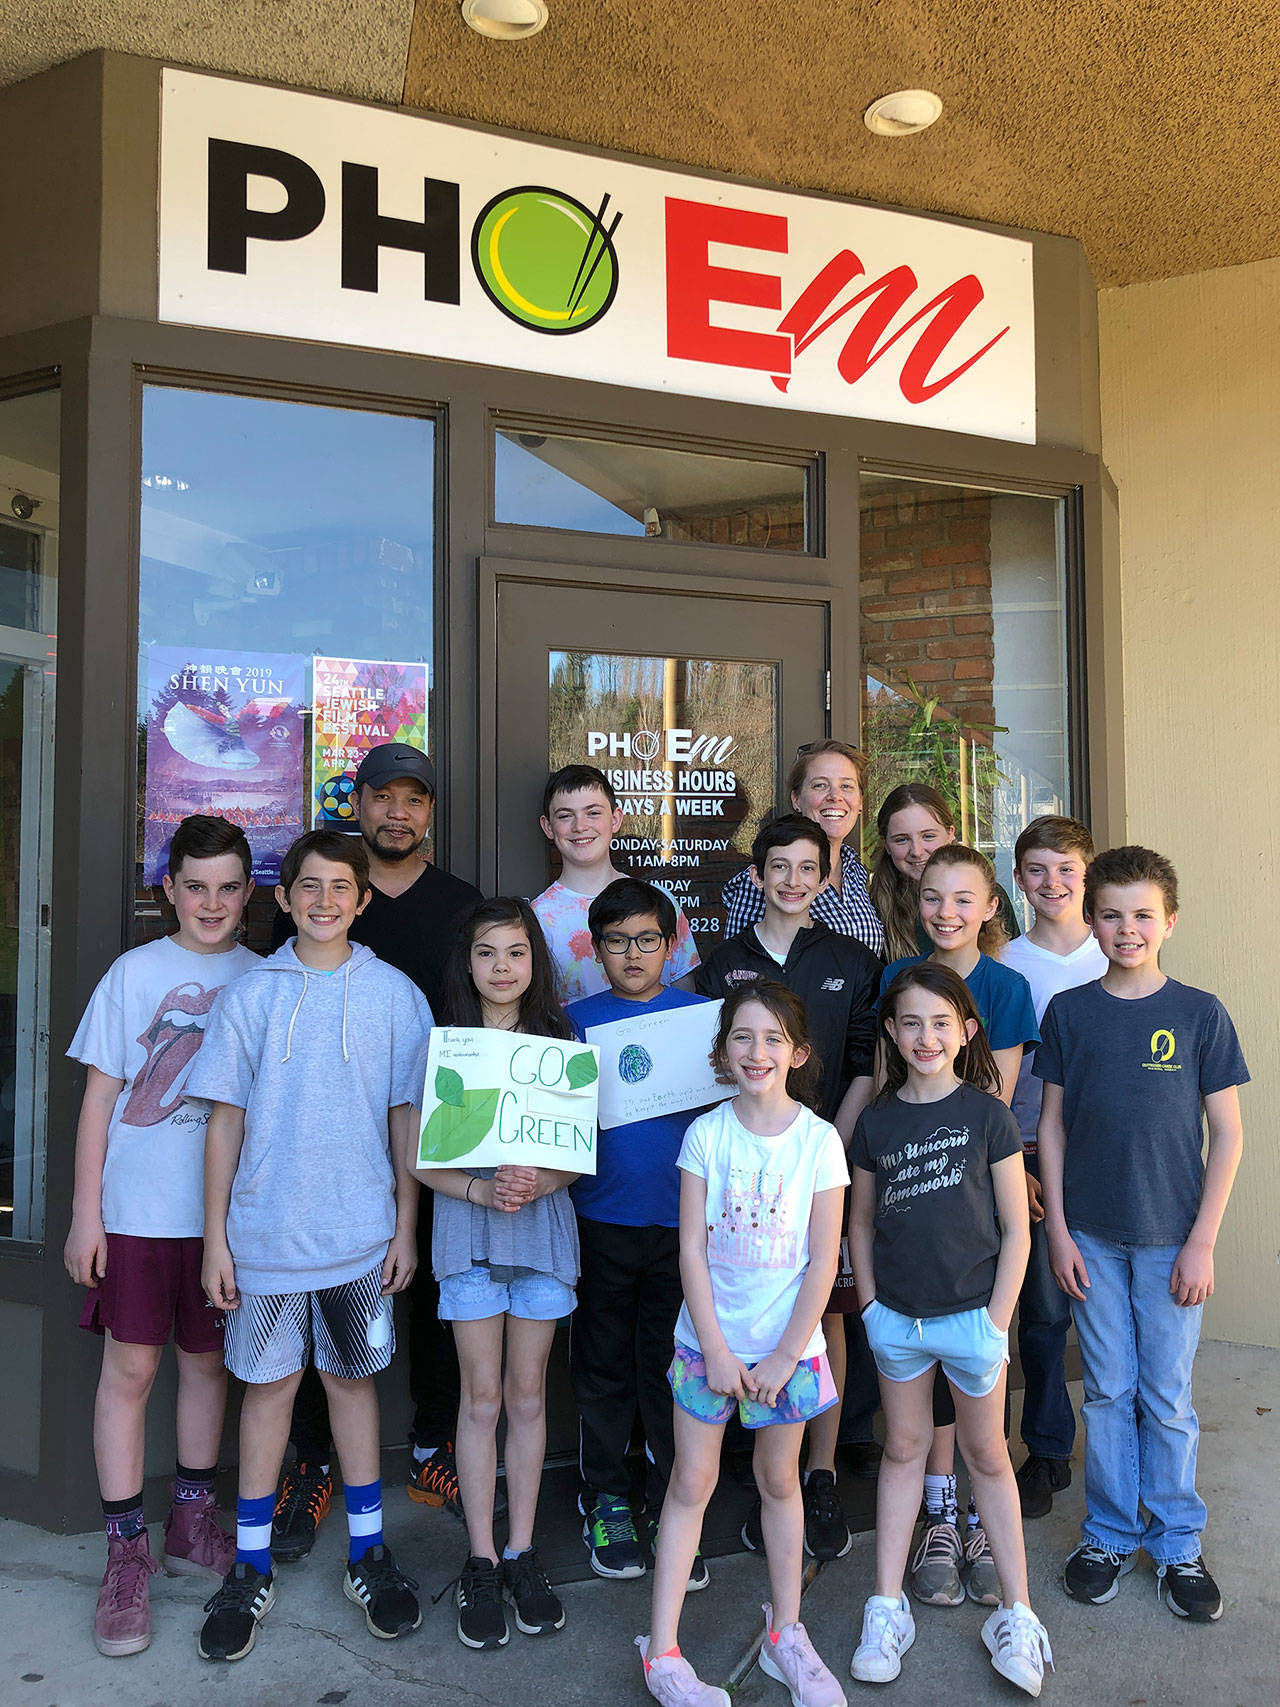 Lakeridge student green team members met with the owner of Pho’em, who decided to switch from Styrofoam to recyclable to-go containers after hearing about the students’ environmental concerns. Photo courtesy of Nancy Weil